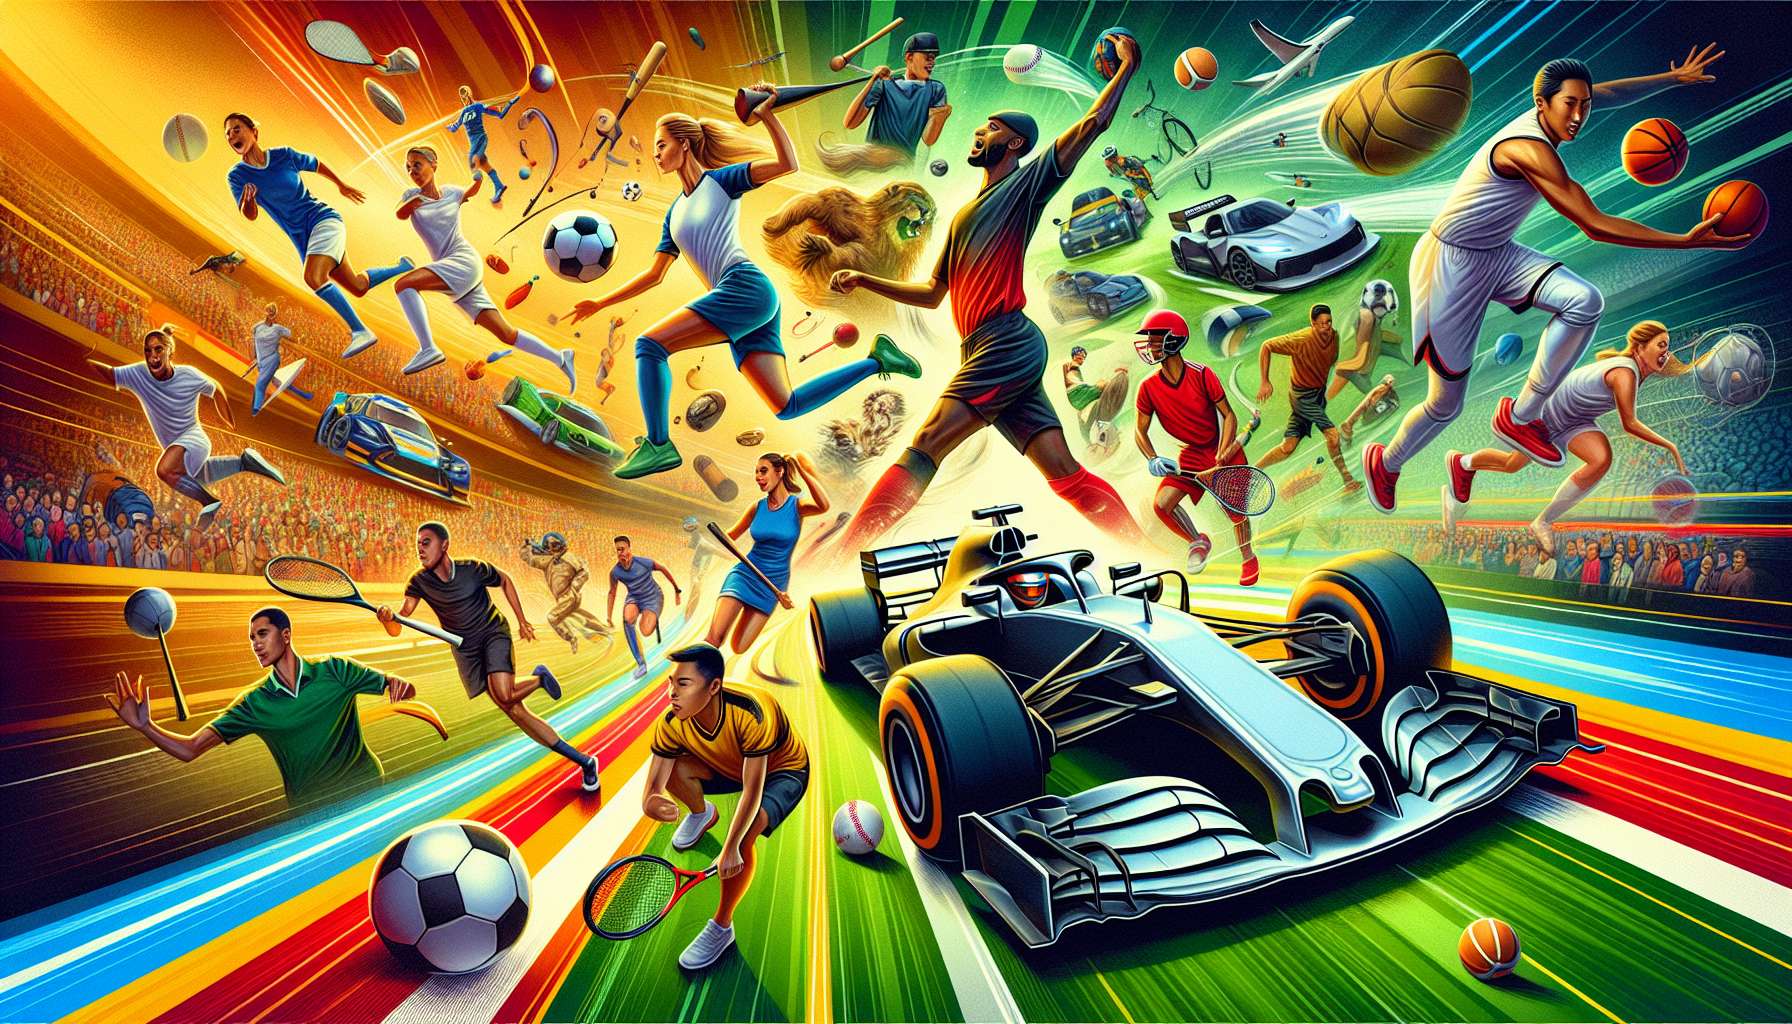 Illustration of various sports categories